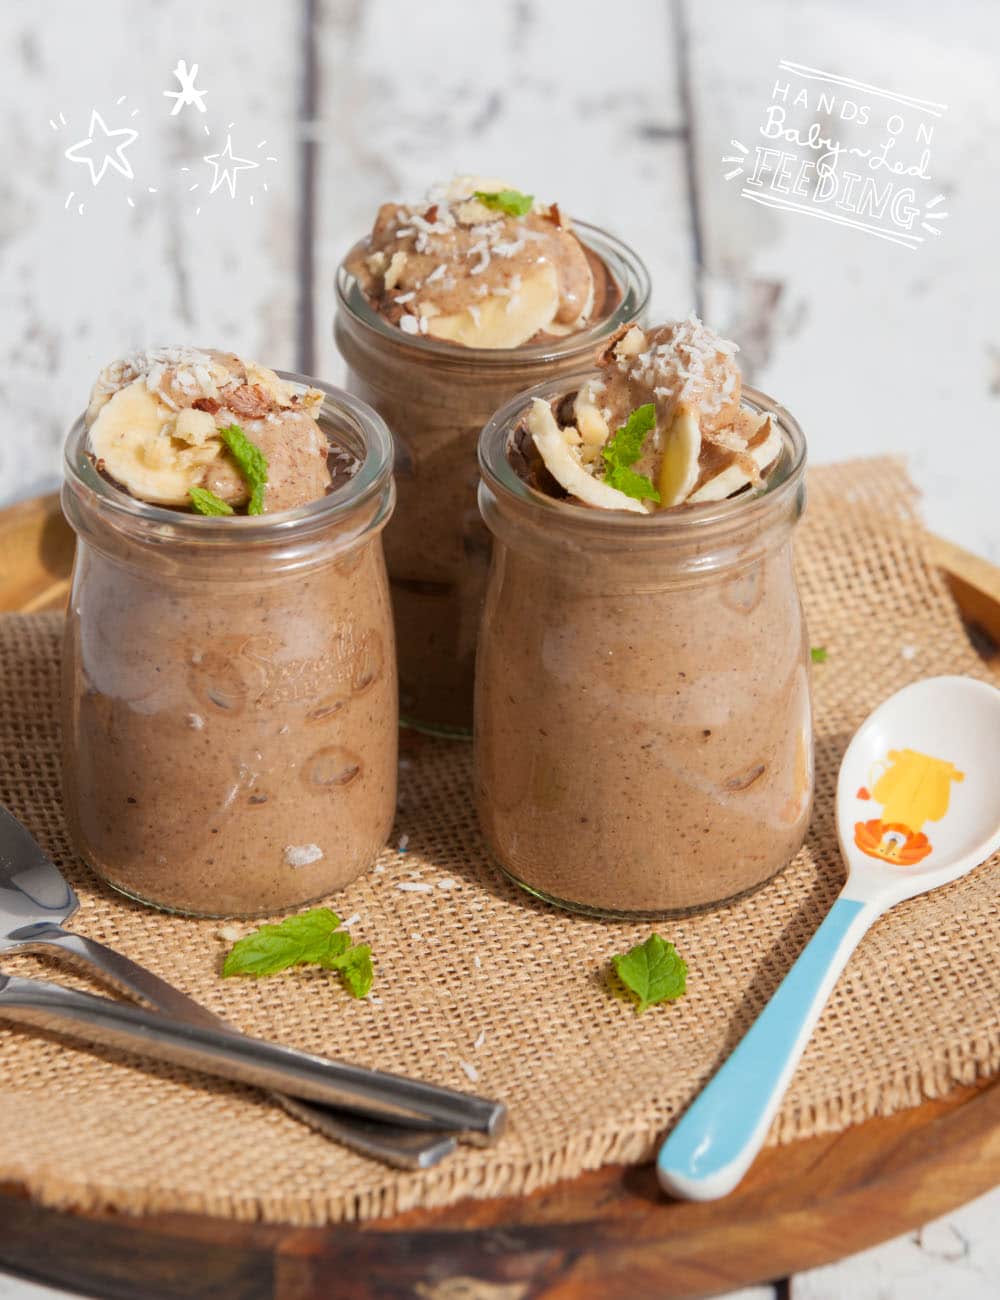 Healthy Chocolate Chia Pudding using only the best ingredients especially from Baby Led Feeding. Long image showing chocolate chia pudding topped with bananas, coconut and peanut butter. Healthy treats for toddlers. This really delicious recipe for Baby Led Weaning is a yummy treat for kids and really healthy too. Baby Led Weaning natural treat recipe. BLW natural treats.